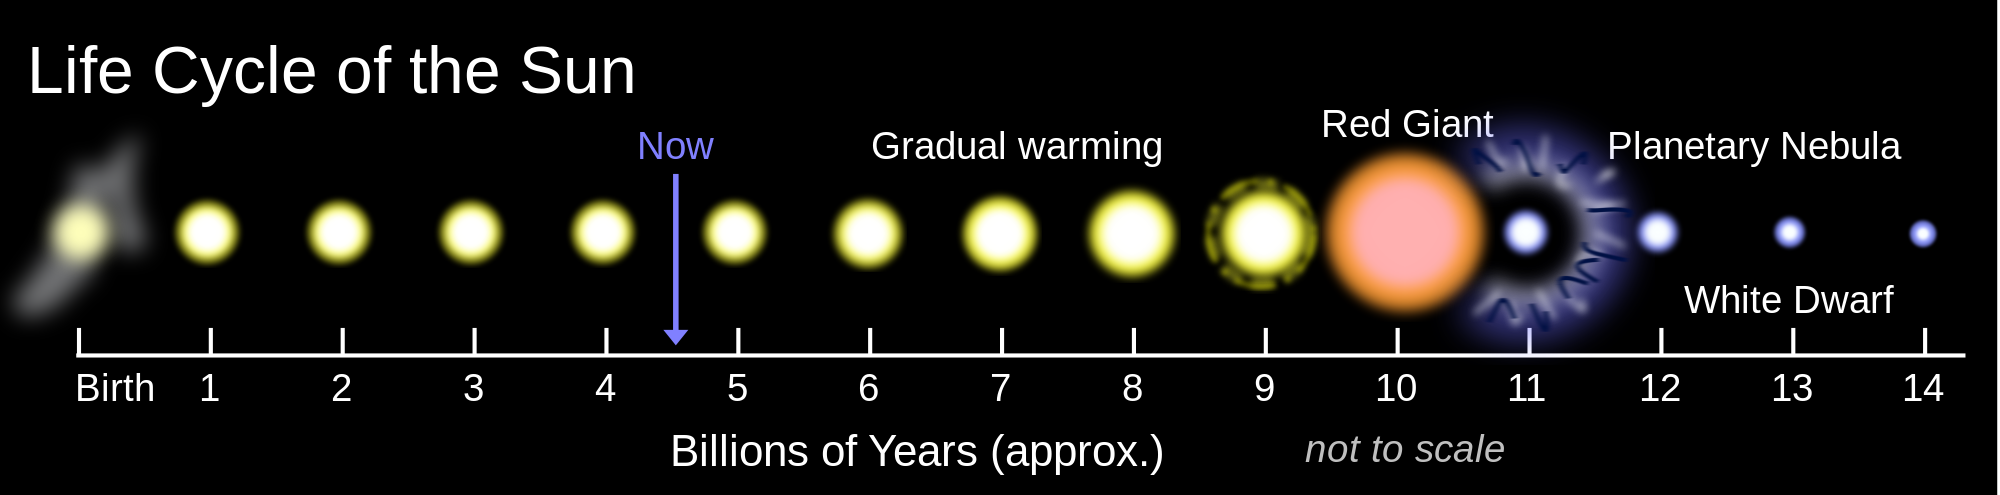 https://en.wikipedia.org/wiki/Formation_and_evolution_of_the_Solar_System image source here